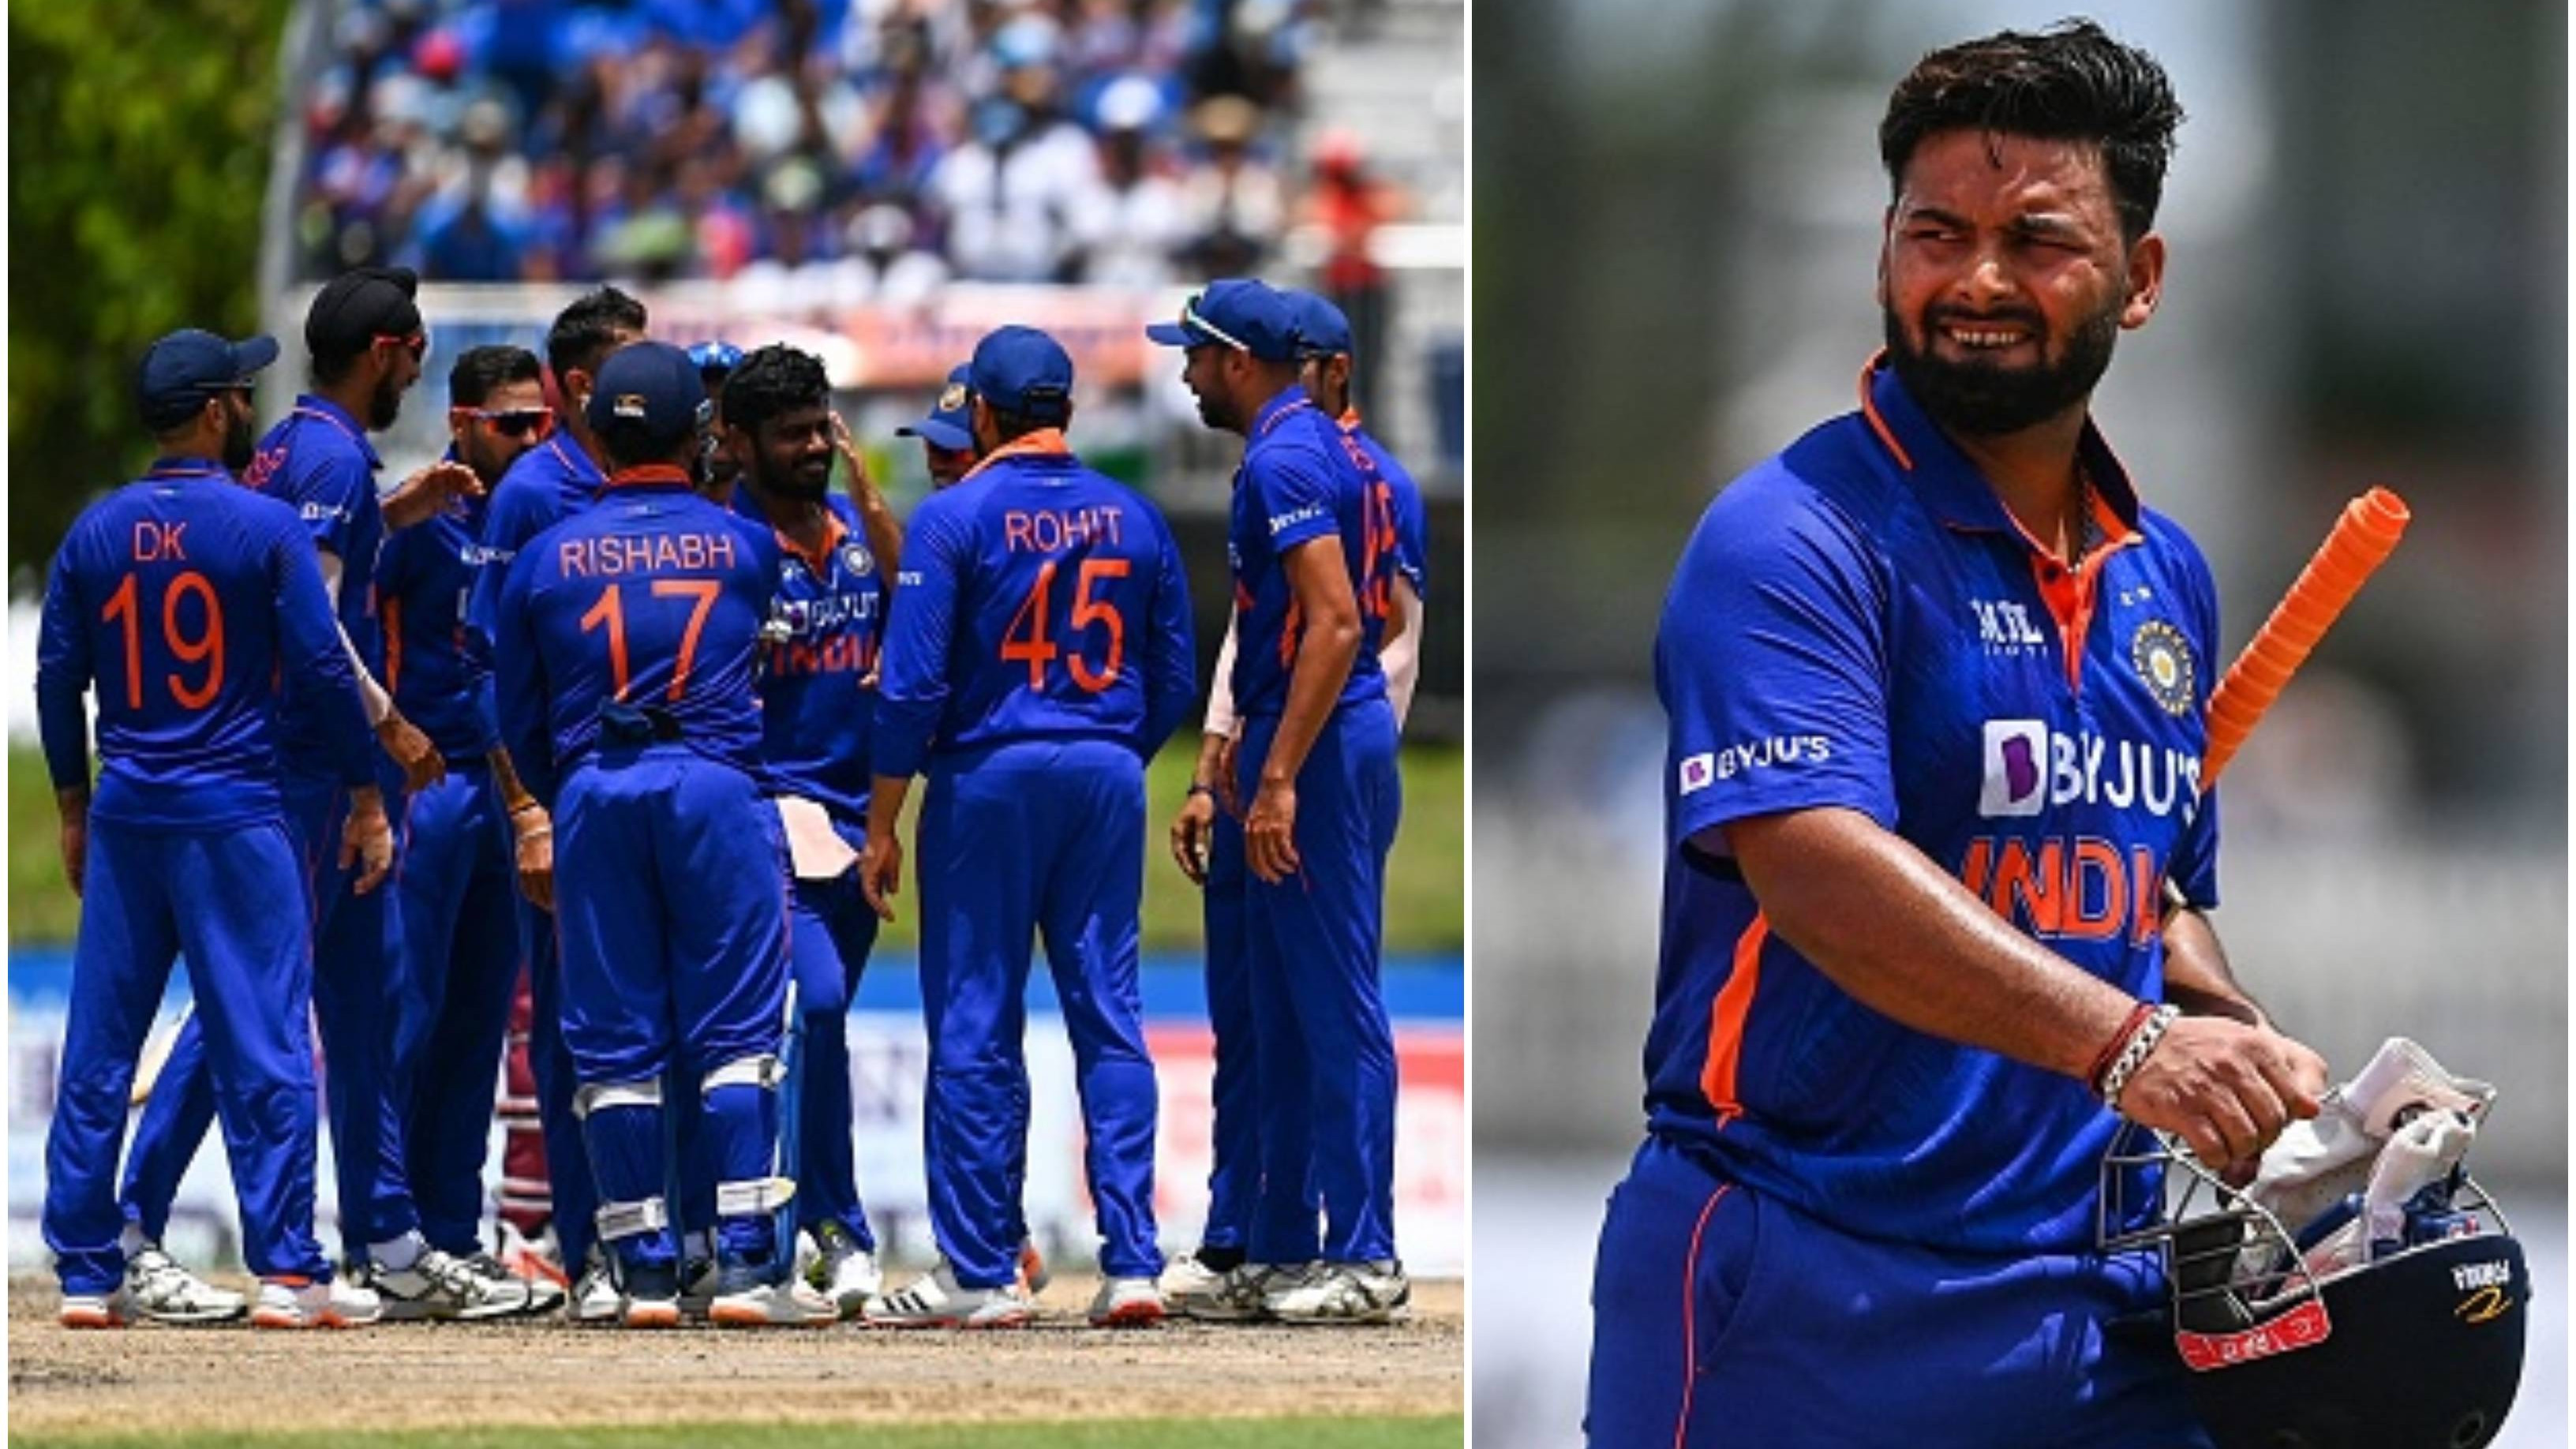 Rishabh Pant says whole Indian team is ‘slightly nervous’ ahead of T20 World Cup 2022